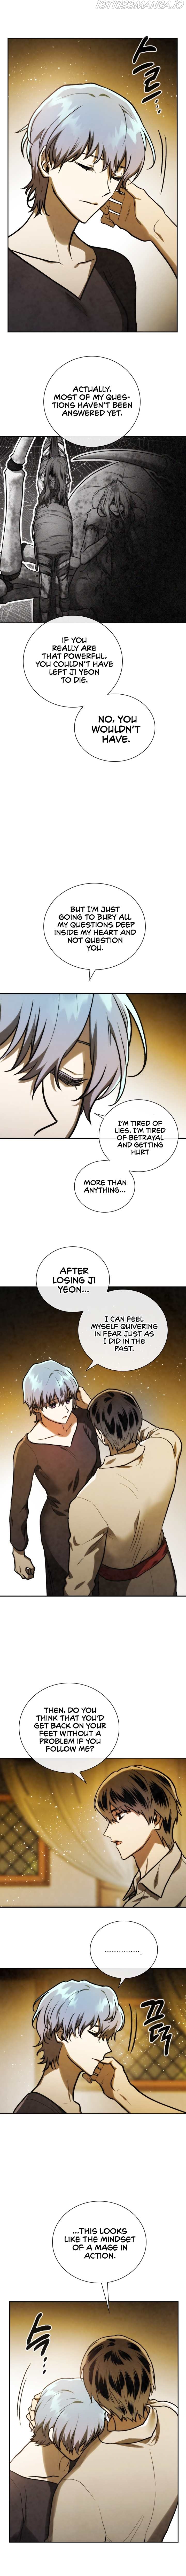 MEMORIZE Chapter 74 - Page 4